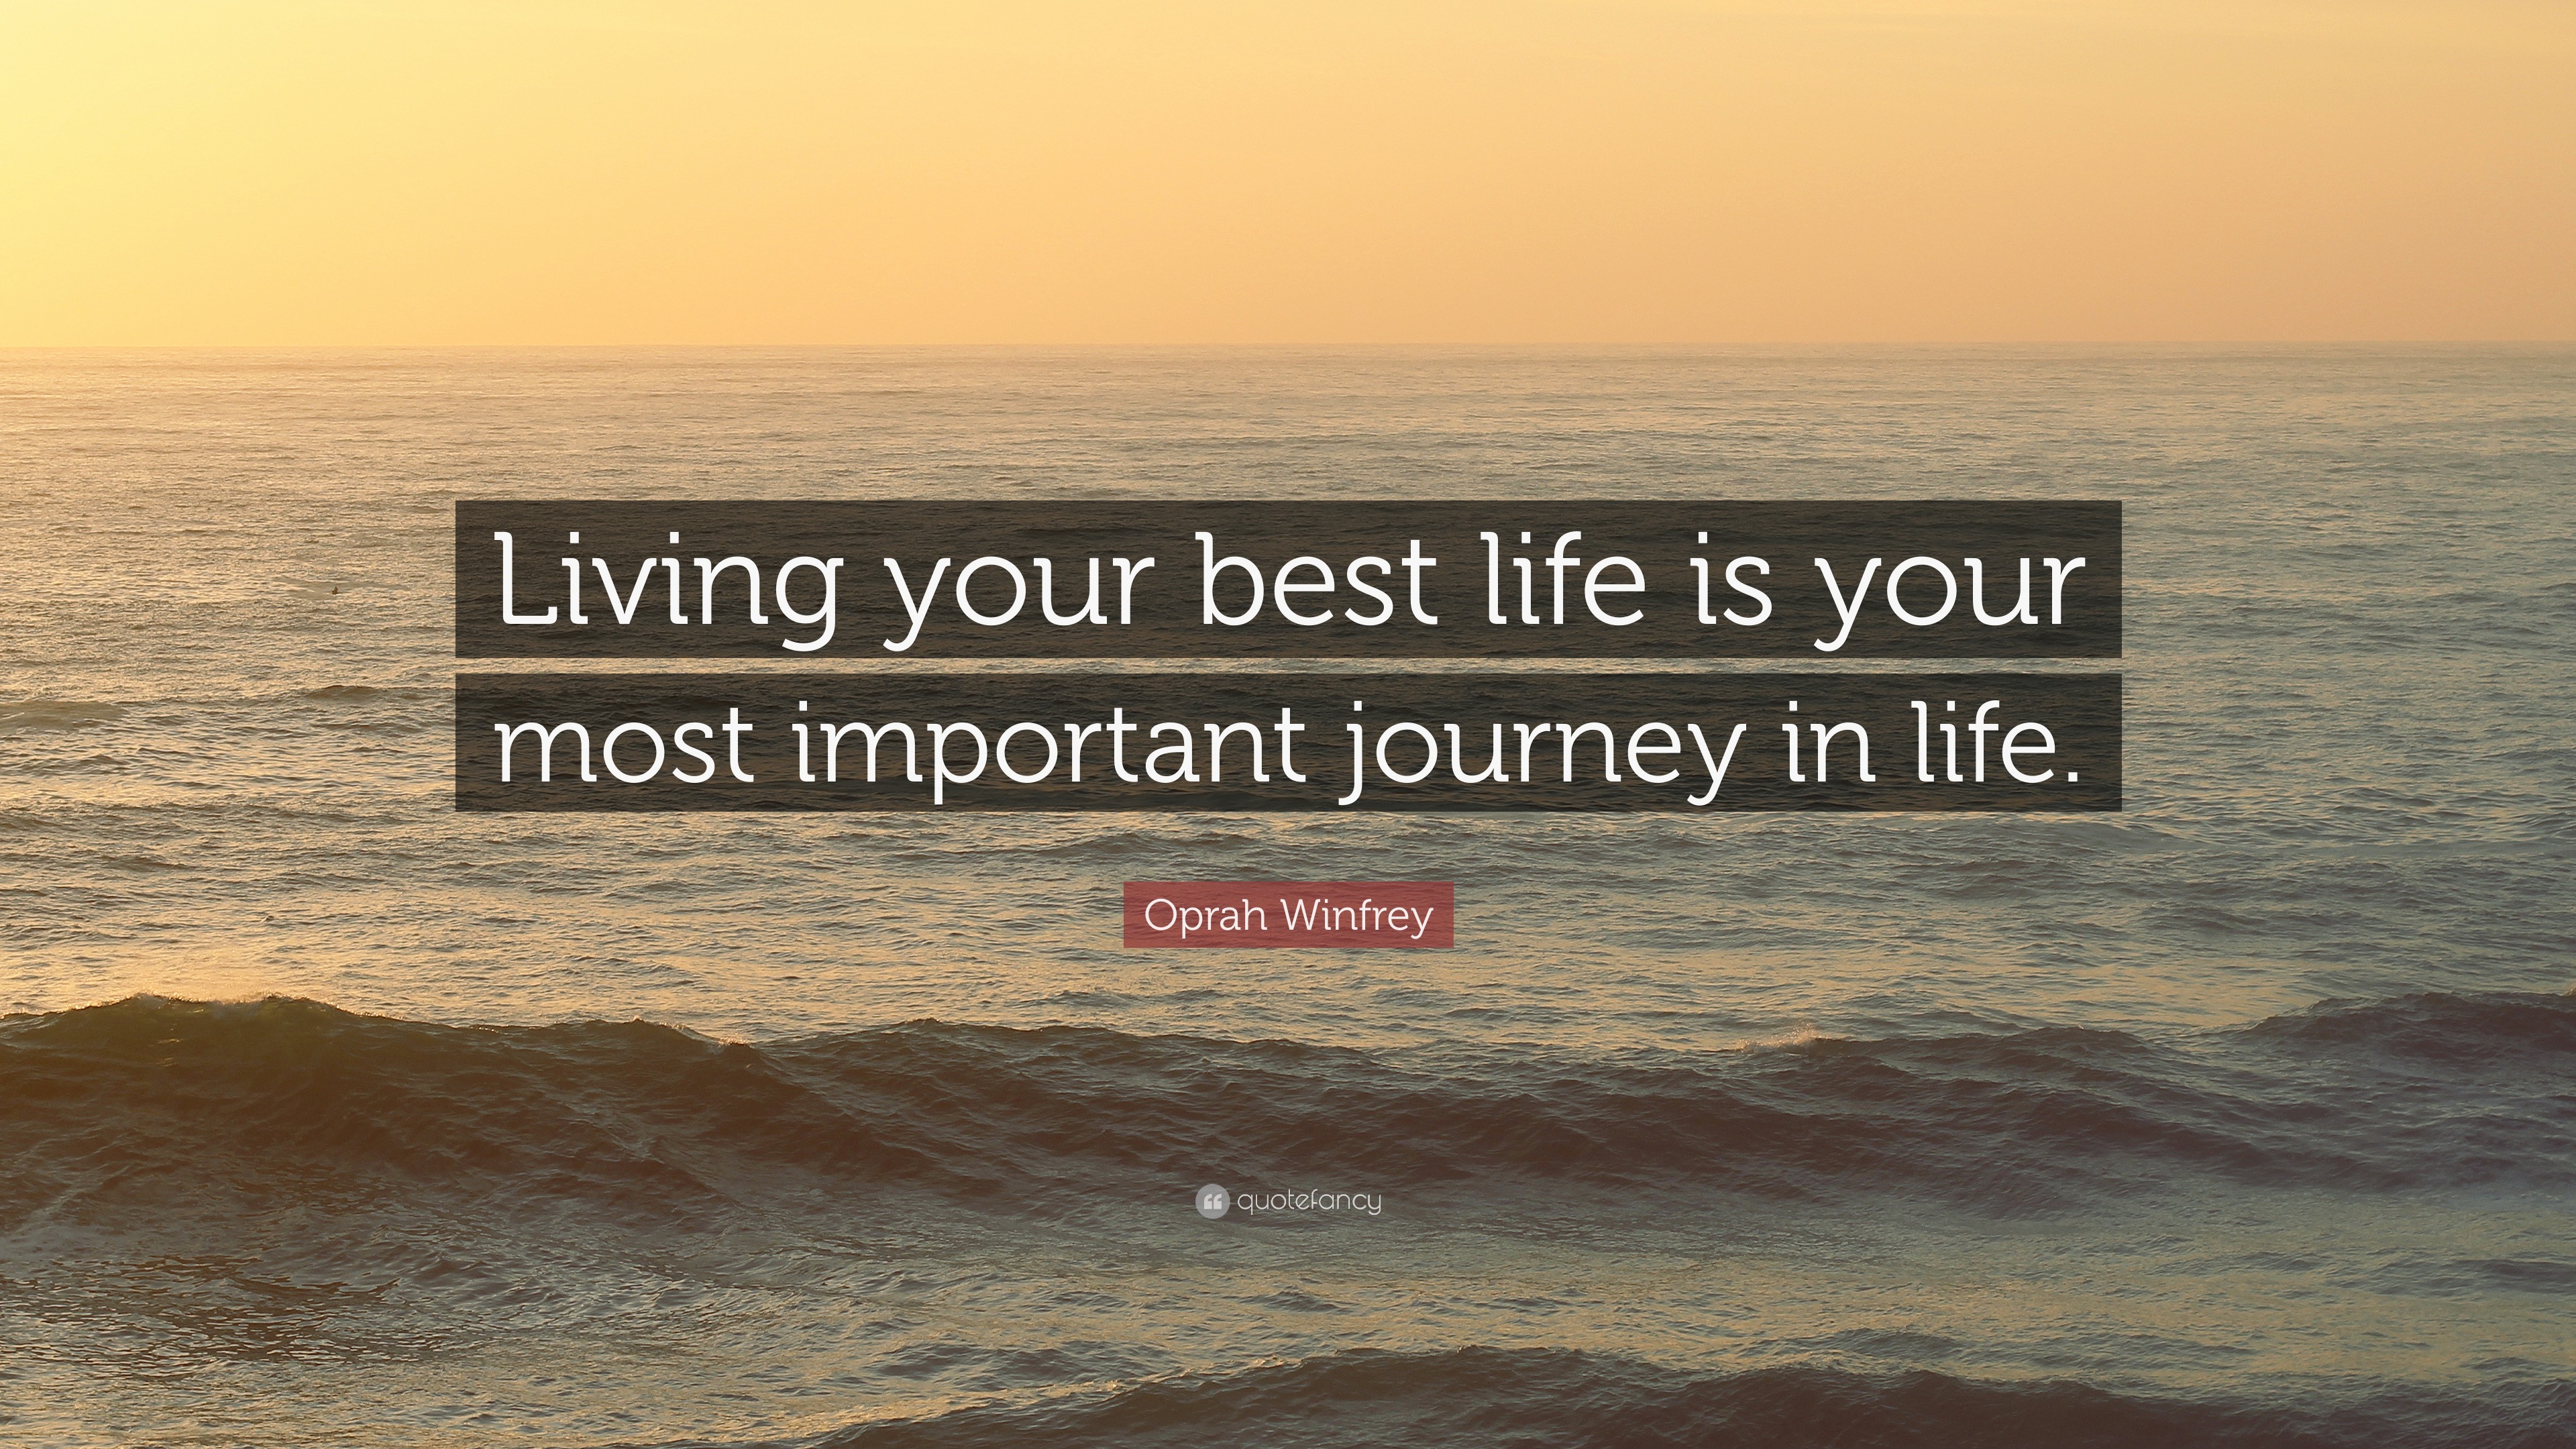 Oprah Winfrey Quote: “Living Your Best Life Is Your Most Important